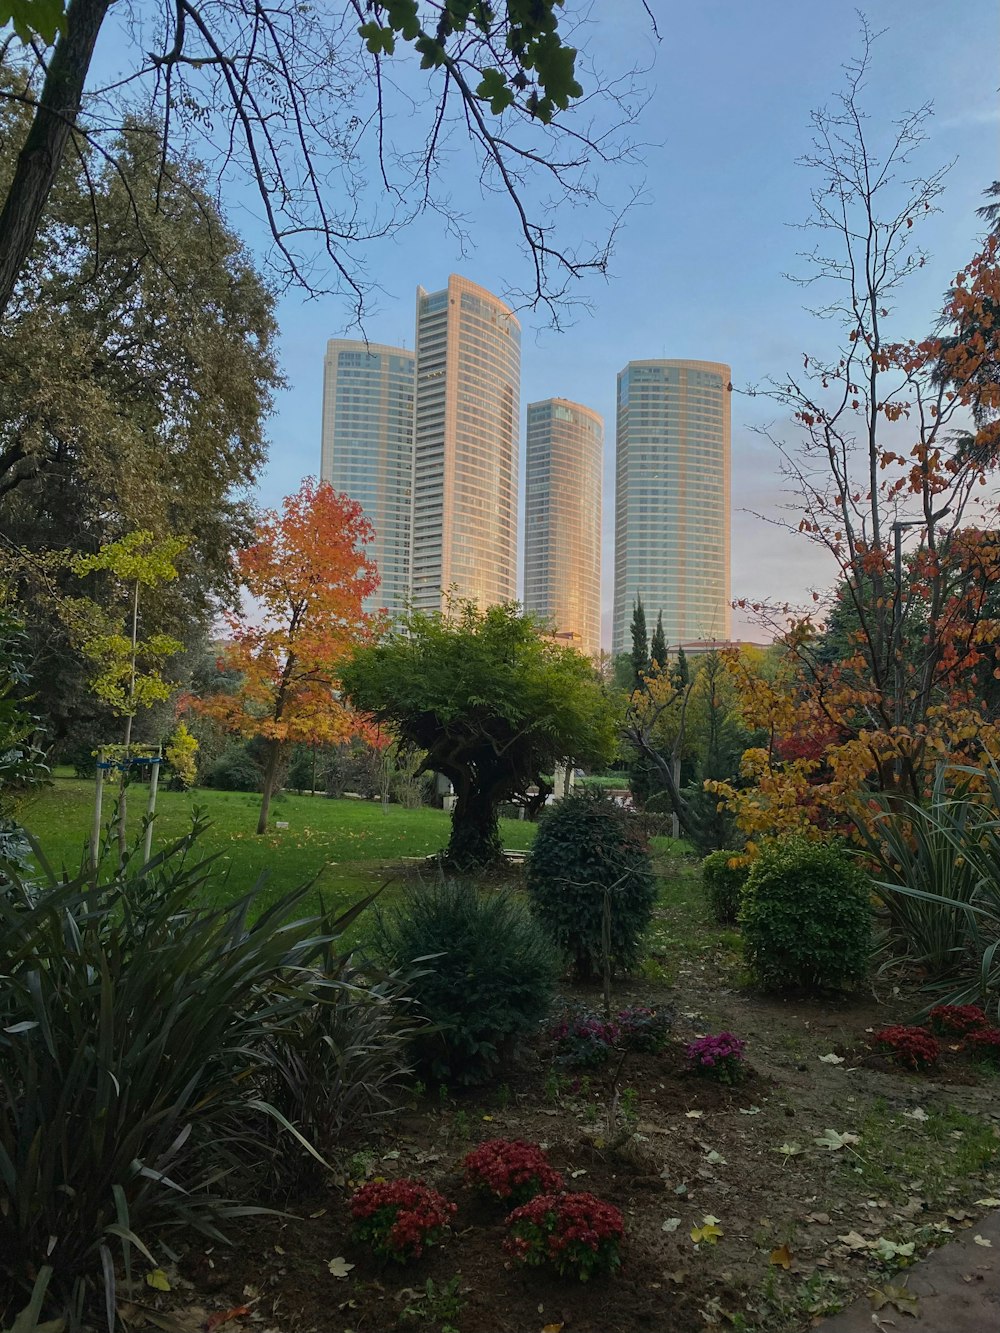 a view of a park with tall buildings in the background